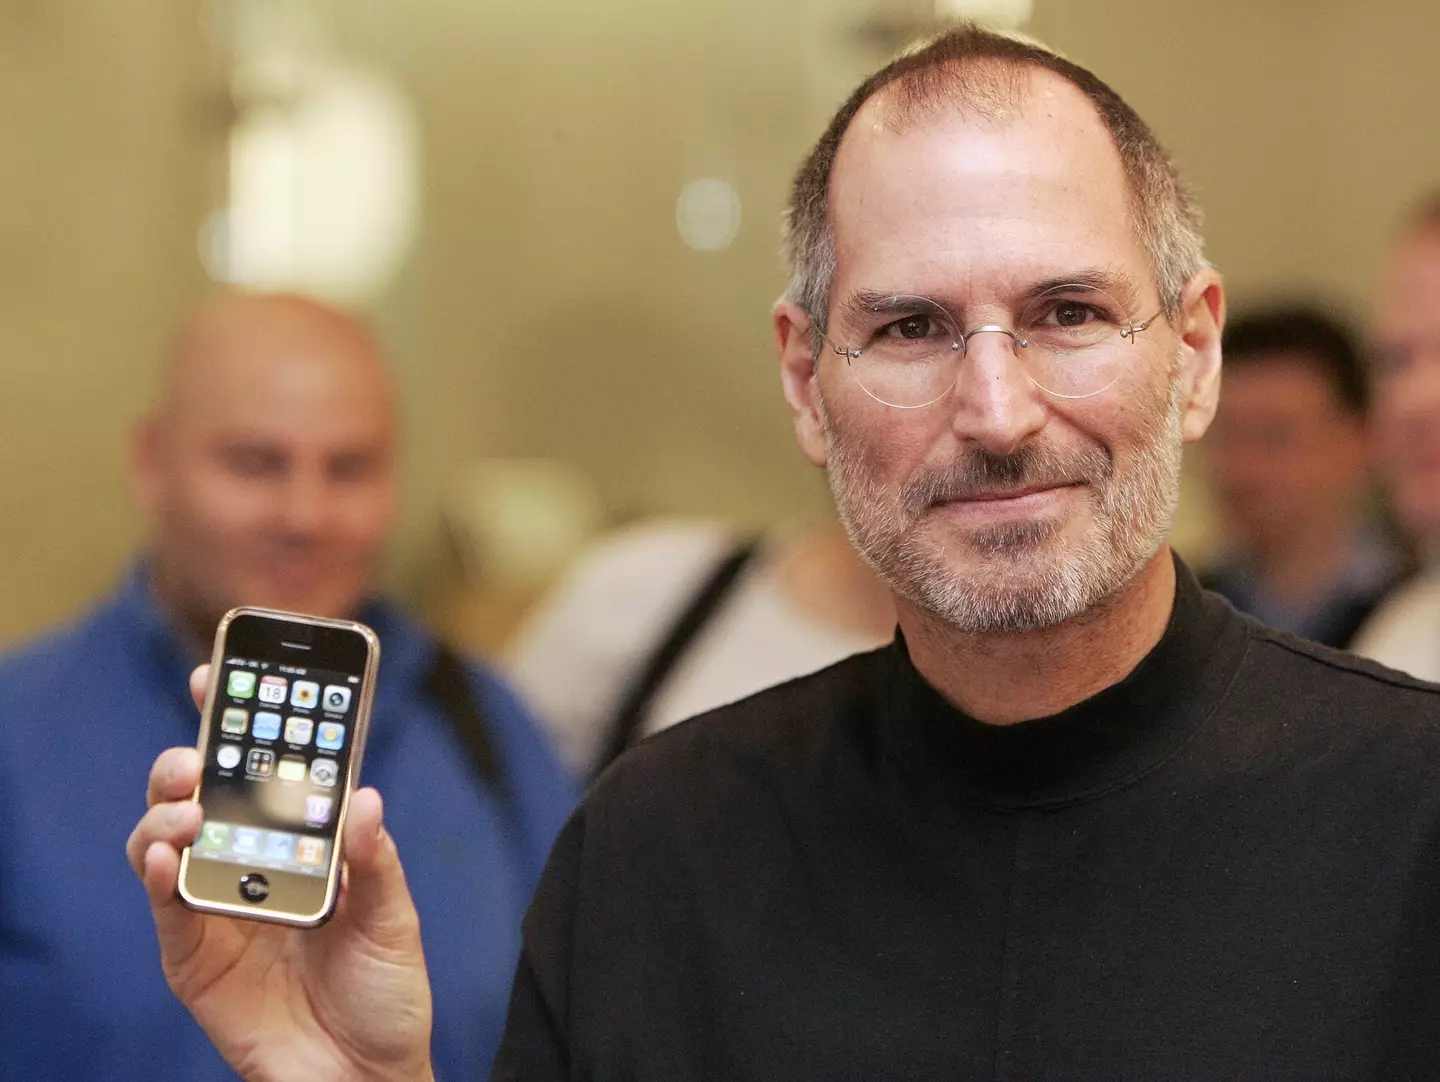 Steve Jobs debuted the first iPhone in 2007.